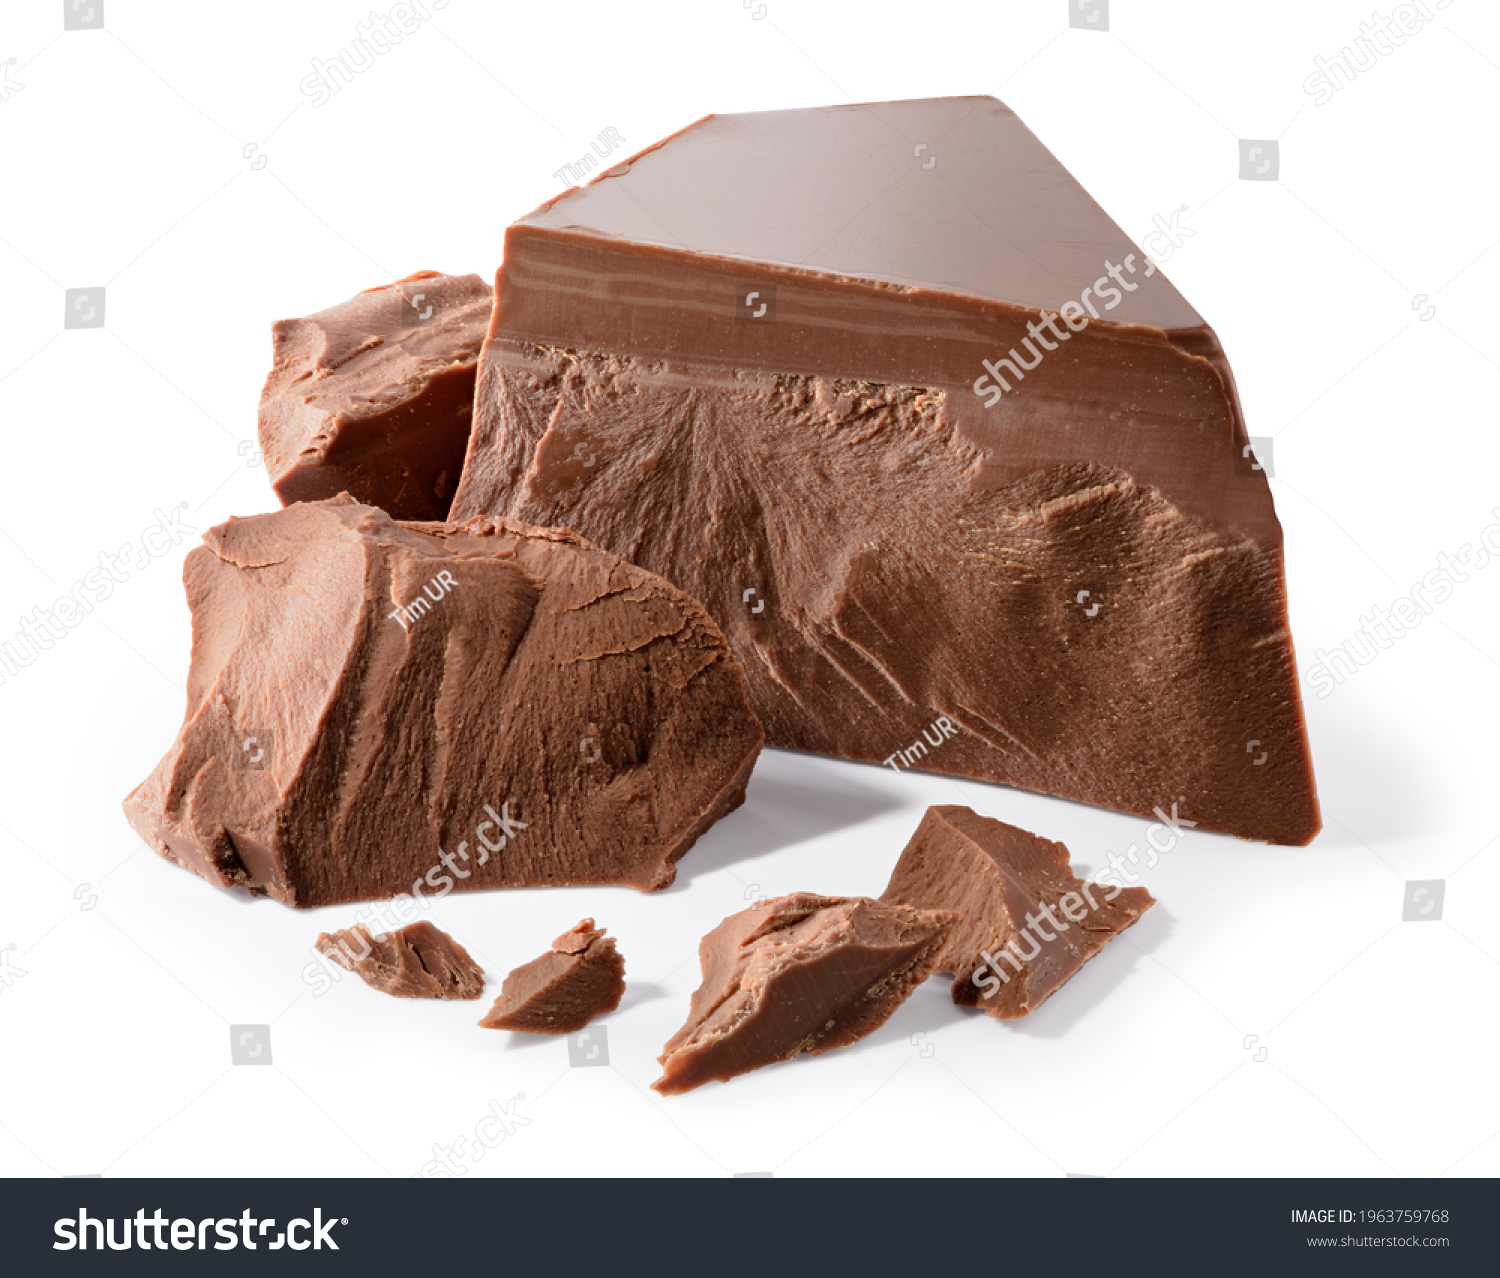 Broken chocolate. Chocolate pieces isolated. Chocolate pieces on white background as package design elements. With clipping path. #1963759768